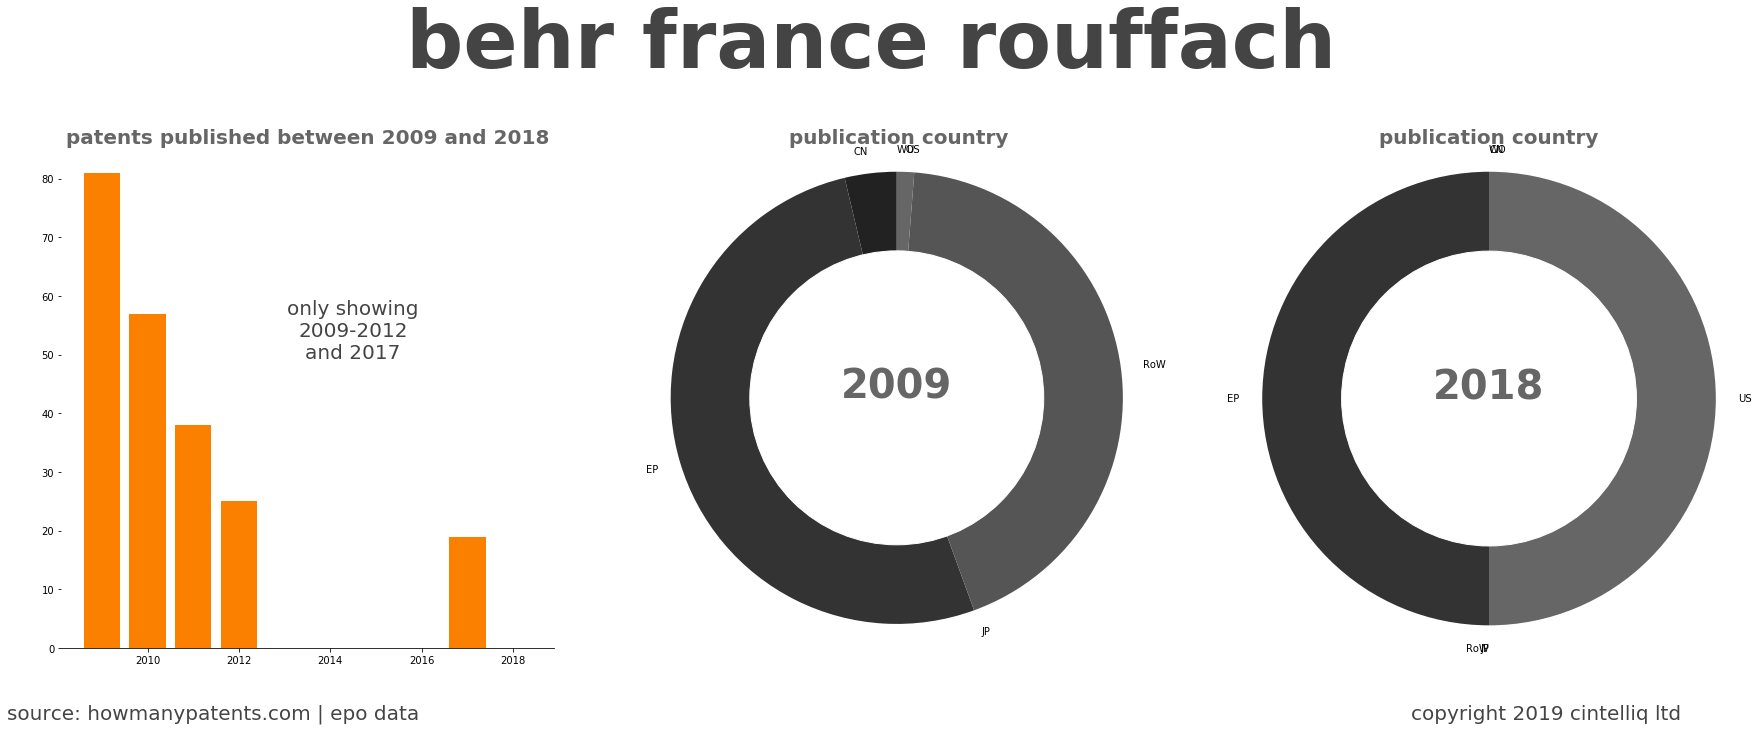 summary of patents for Behr France Rouffach